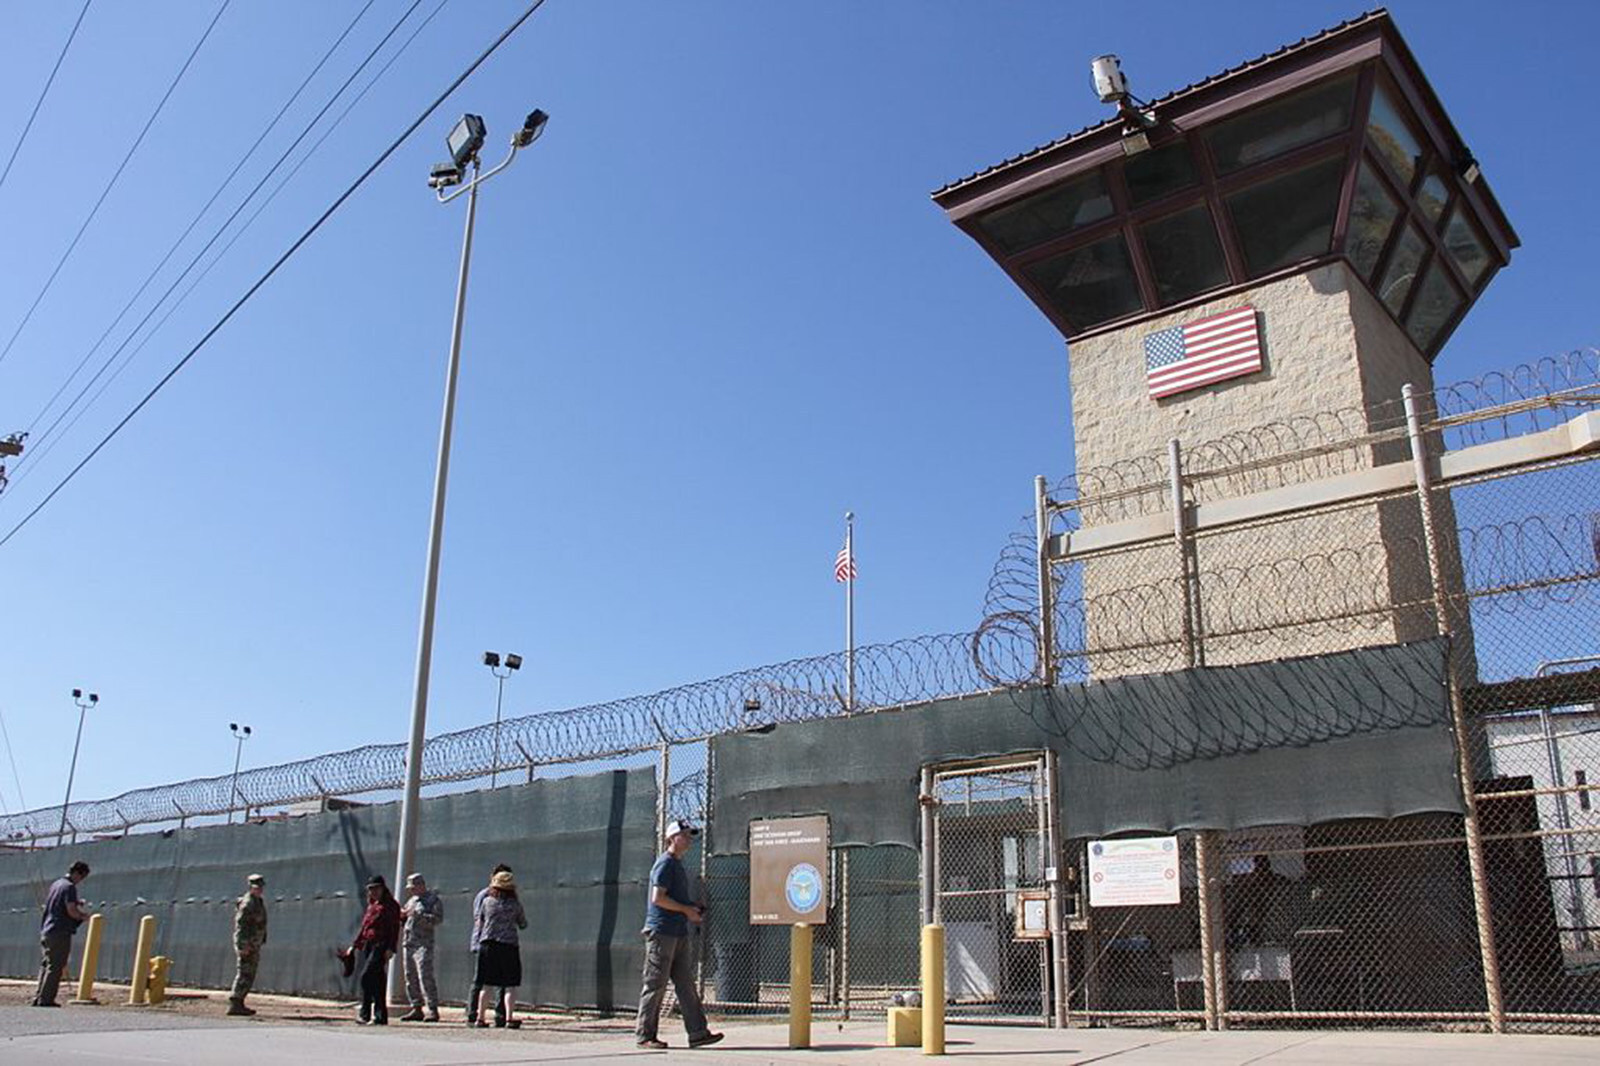 People walk past a guard tower outside the US Military’s prison in Guantanamo Bay, Cuba. Photo: AFP via Getty Images / TNS